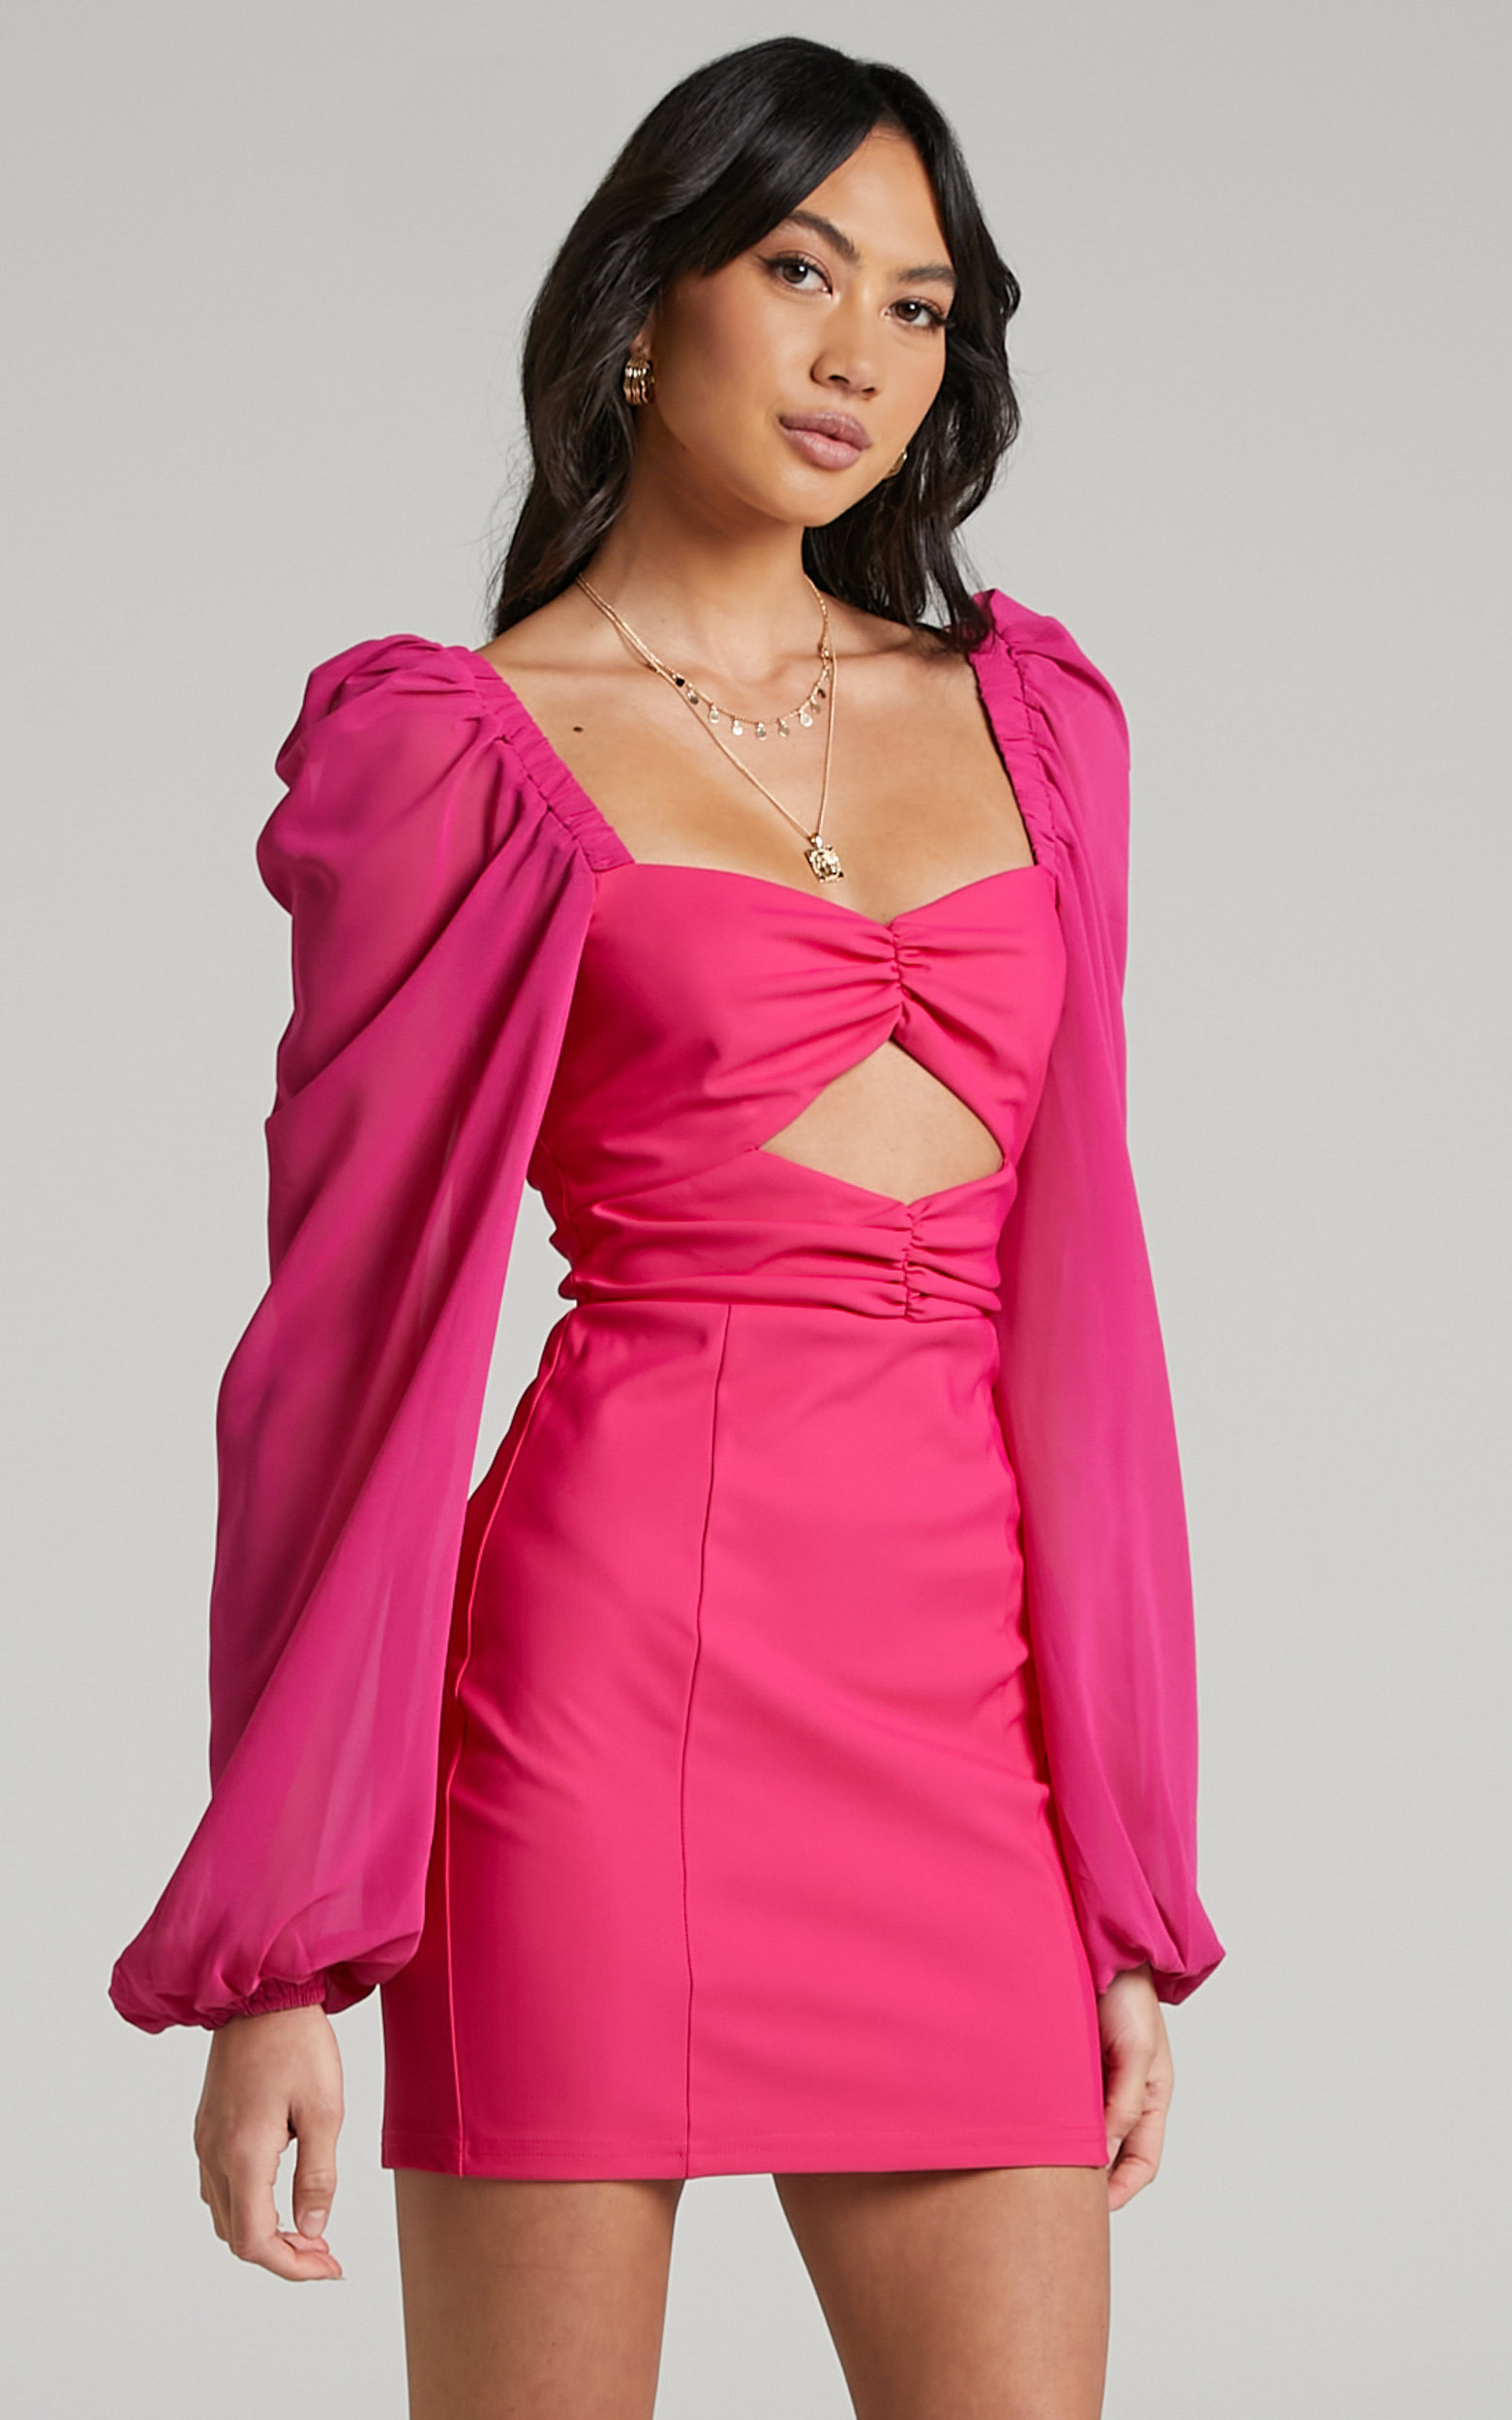 Lilian Chiffon Sleeve Cut Out Mini Dress in Pink - 06, PNK2, hi-res image number null